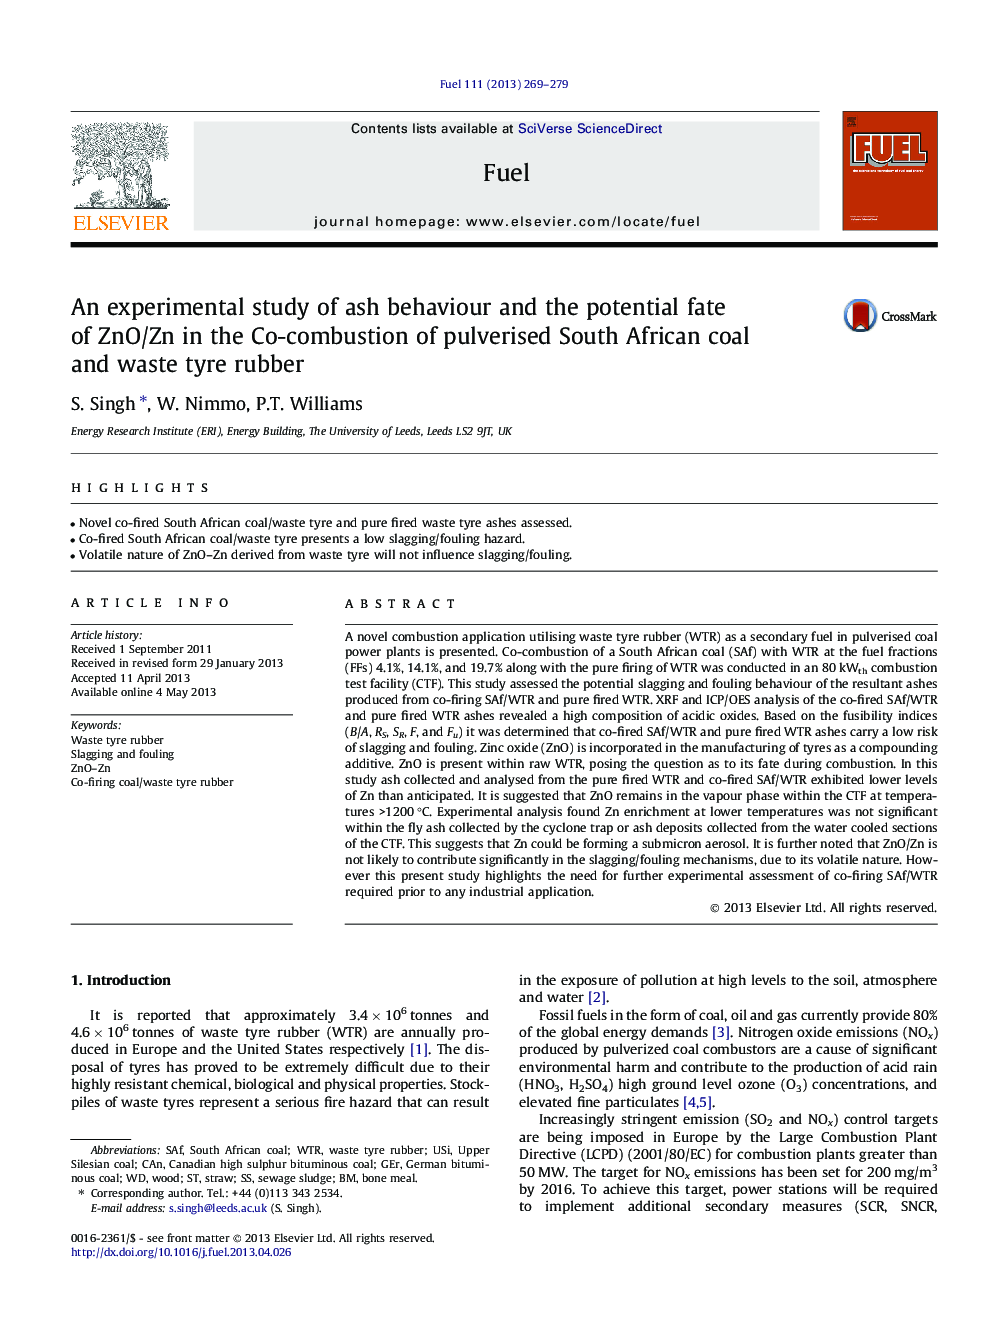 An experimental study of ash behaviour and the potential fate of ZnO/Zn in the Co-combustion of pulverised South African coal and waste tyre rubber